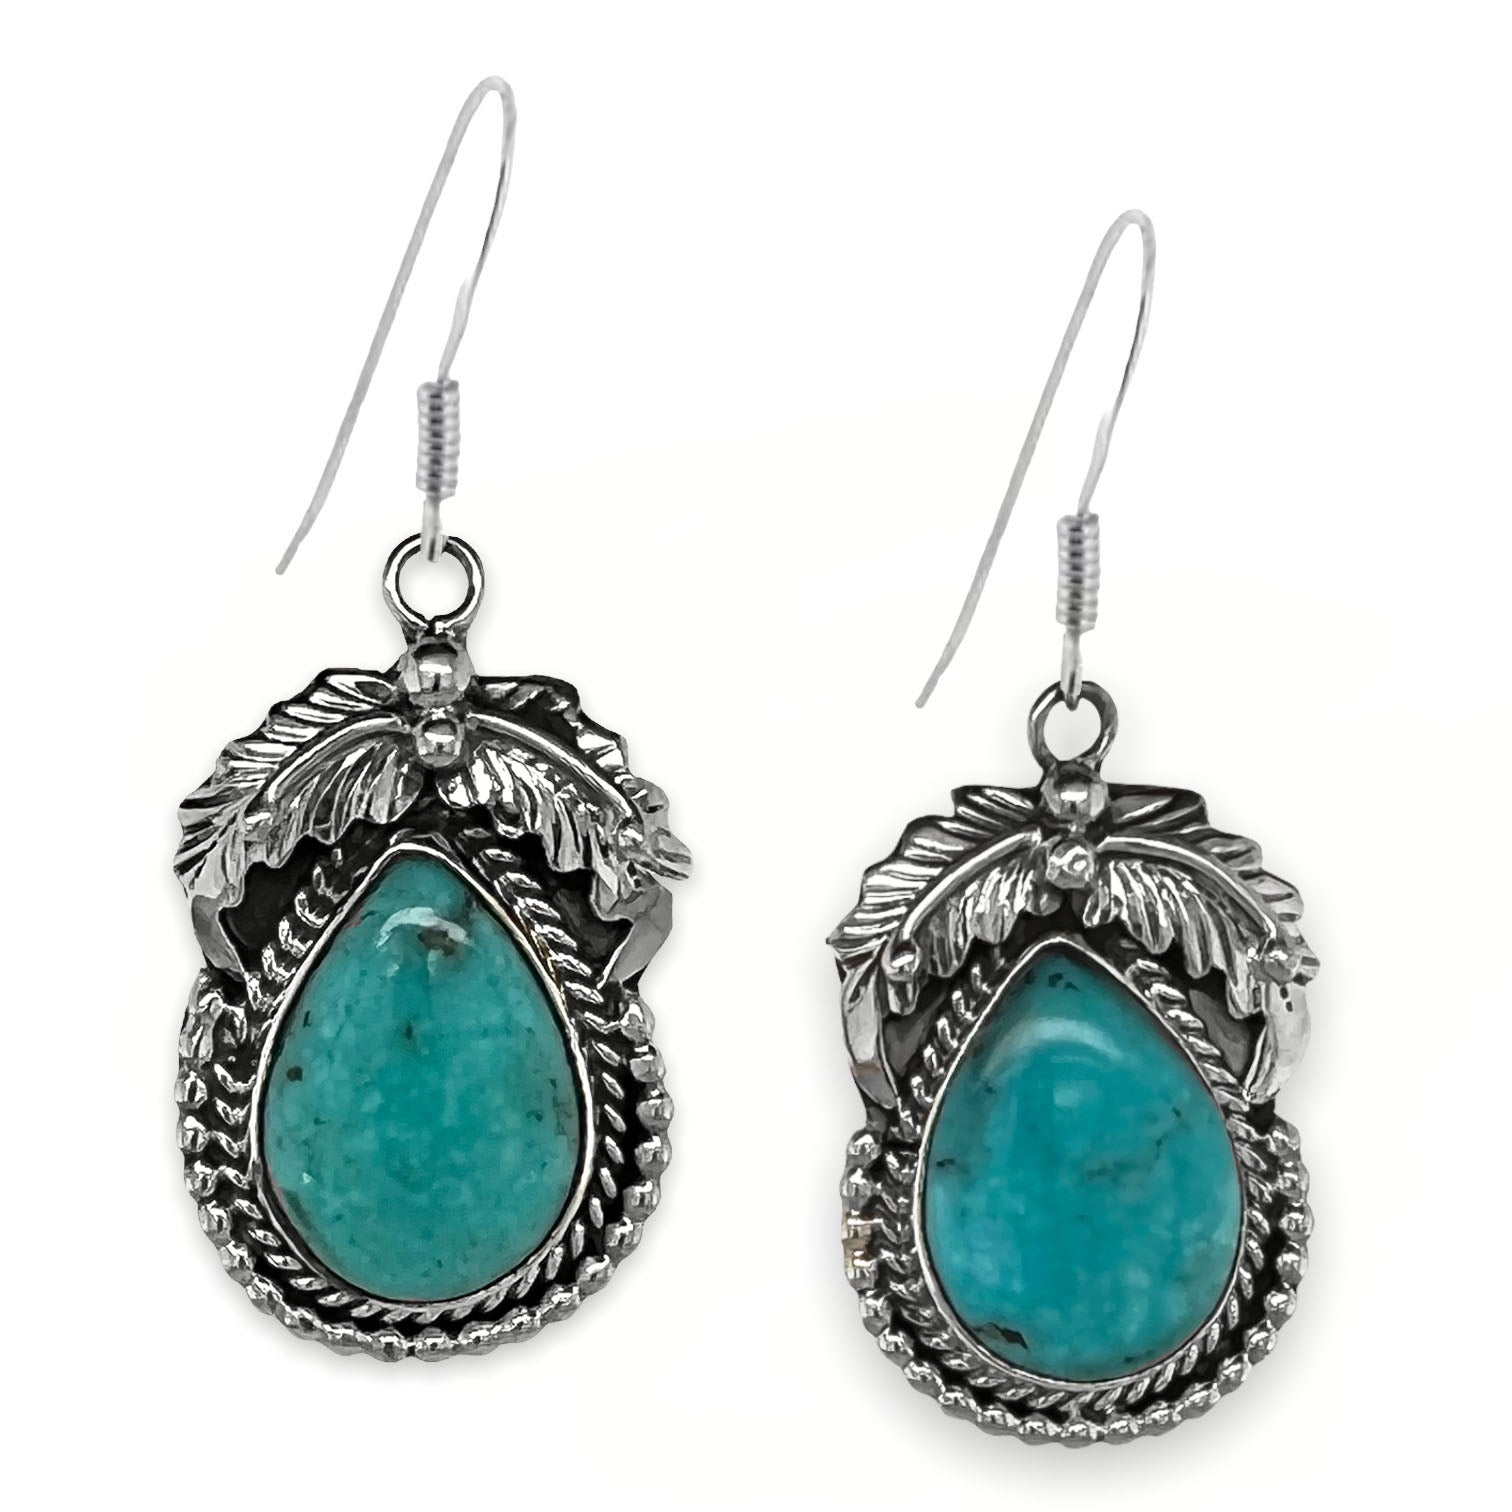 Andrew Vandever handcrafted these sterling silver and genuine turquois –  Del Sol/Off Fourth